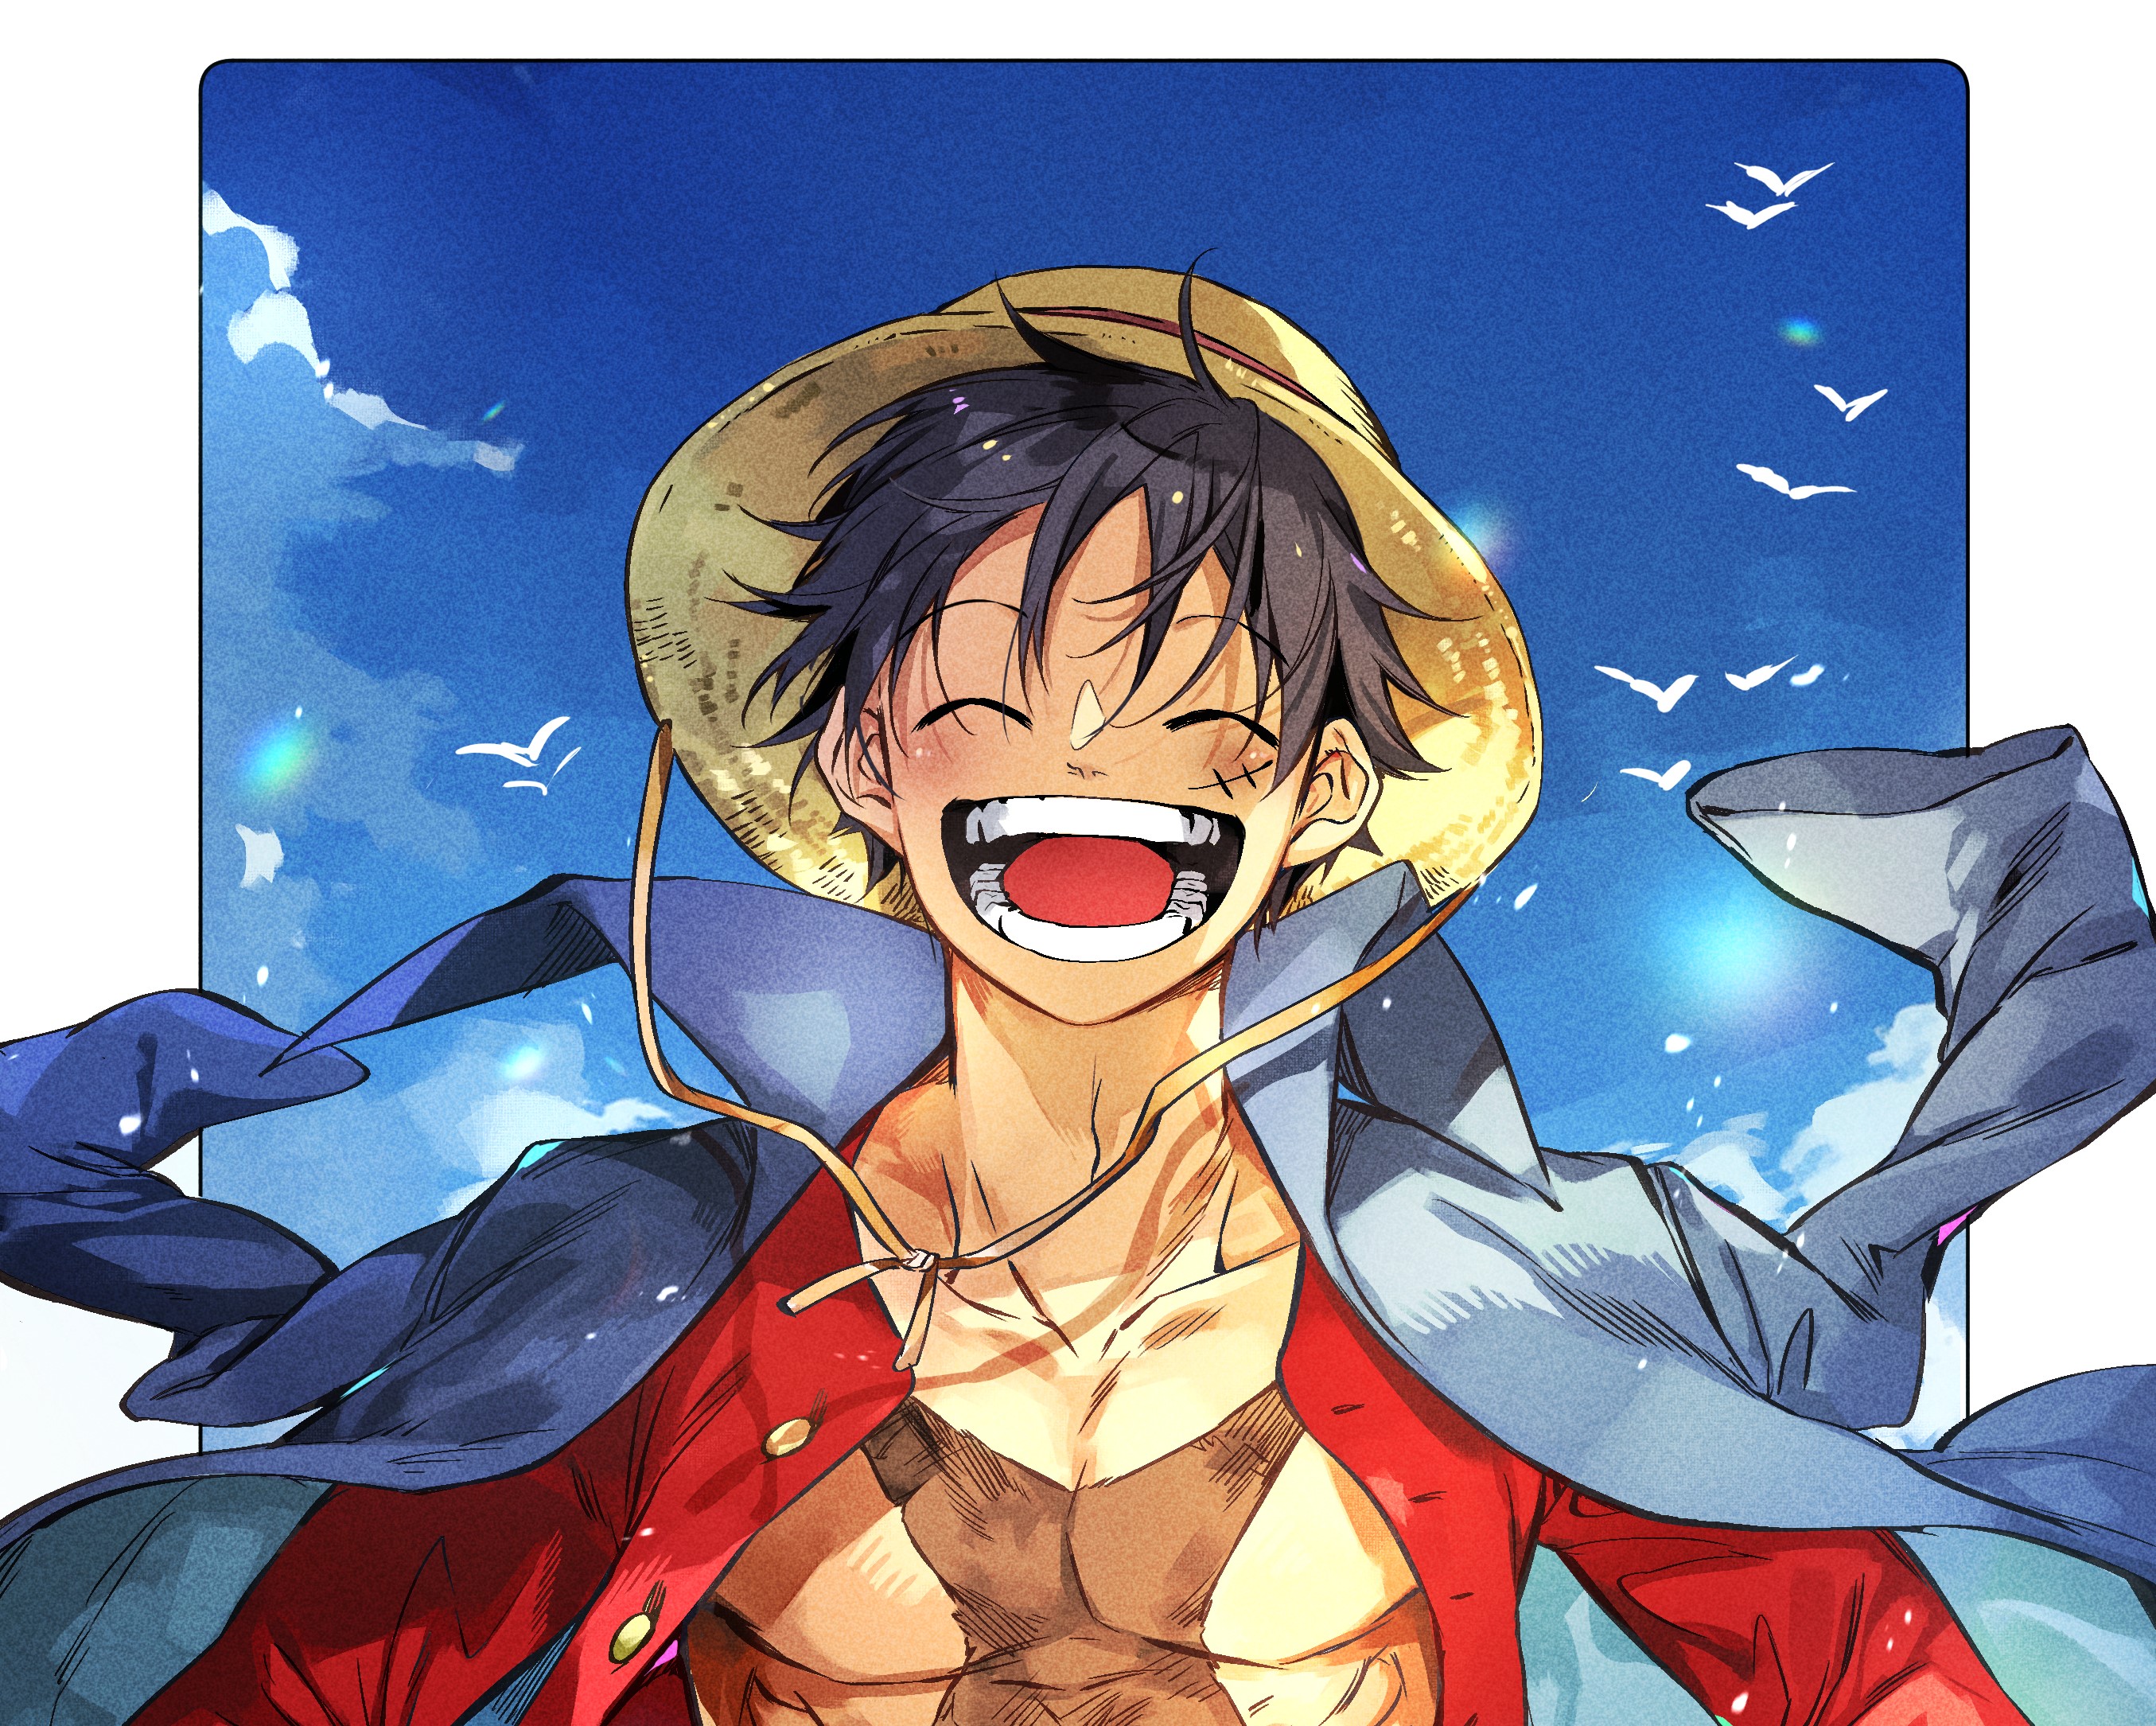 Monkey d luffy from anime one piece, detailed, anime boy on Craiyon-demhanvico.com.vn